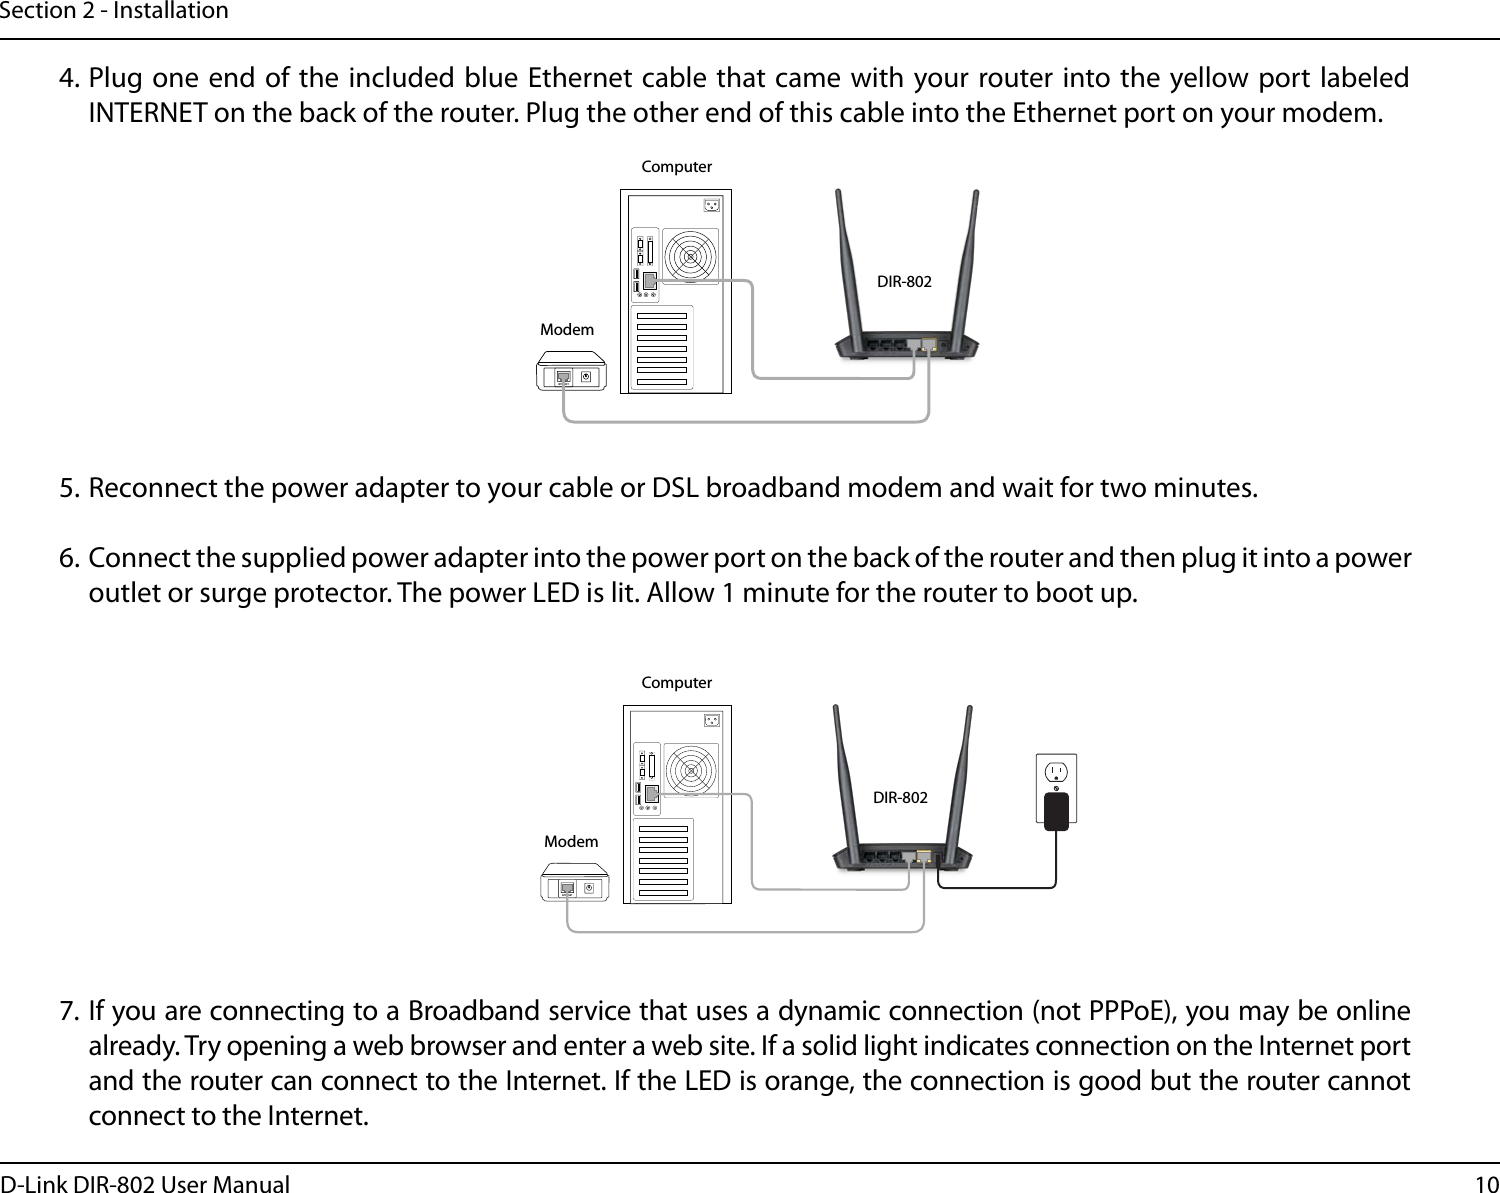 10D-Link DIR-802 User ManualSection 2 - InstallationINTERNET4. Plug one end  of the included blue  Ethernet cable that came with your router into the yellow port labeled INTERNET on the back of the router. Plug the other end of this cable into the Ethernet port on your modem.5. Reconnect the power adapter to your cable or DSL broadband modem and wait for two minutes.6. Connect the supplied power adapter into the power port on the back of the router and then plug it into a power outlet or surge protector. The power LED is lit. Allow 1 minute for the router to boot up. 7. If you are connecting to a Broadband service that uses a dynamic connection (not PPPoE), you may be online already. Try opening a web browser and enter a web site. If a solid light indicates connection on the Internet port and the router can connect to the Internet. If the LED is orange, the connection is good but the router cannot connect to the Internet.INTERNETDIR-802DIR-802ModemModemComputerComputer